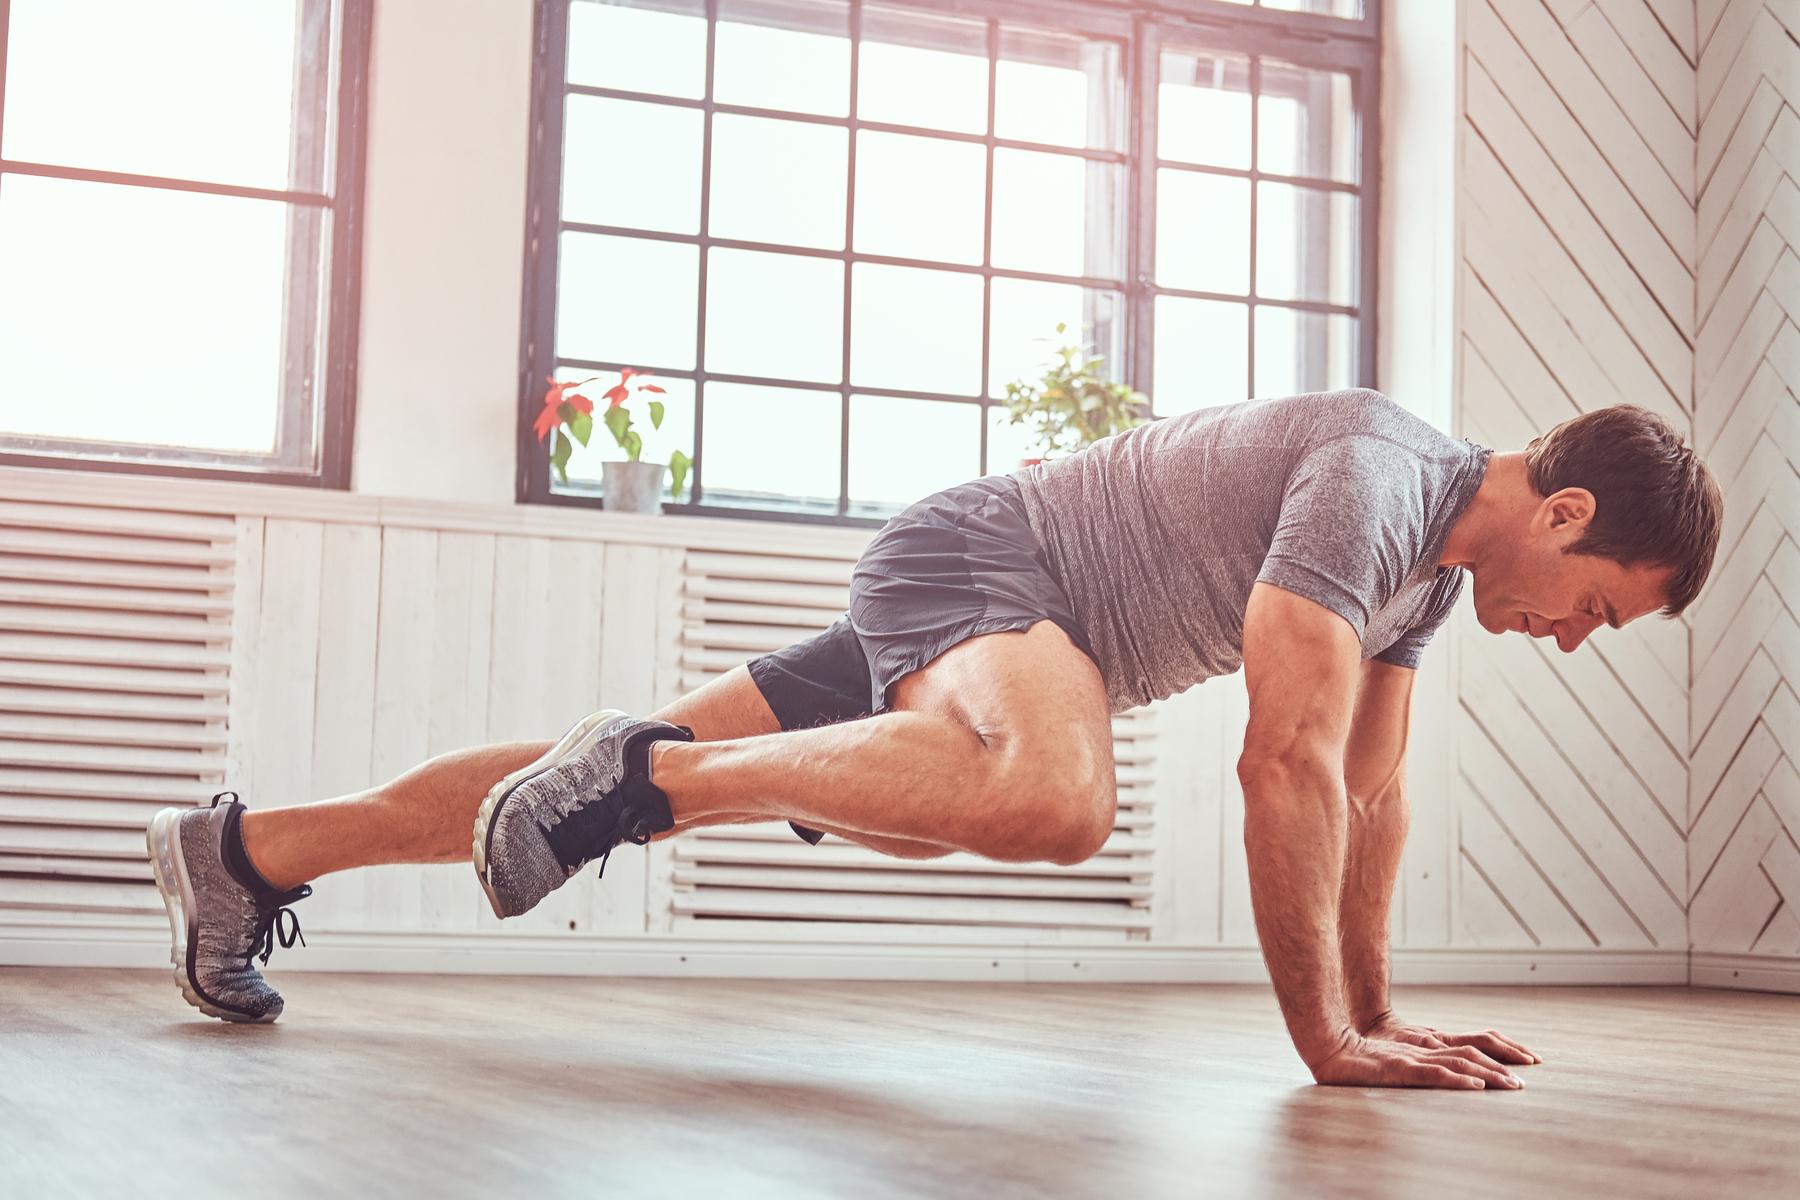 Short Workouts | From 4-Seconds to 20-minutes, there’s always time for a quick workout